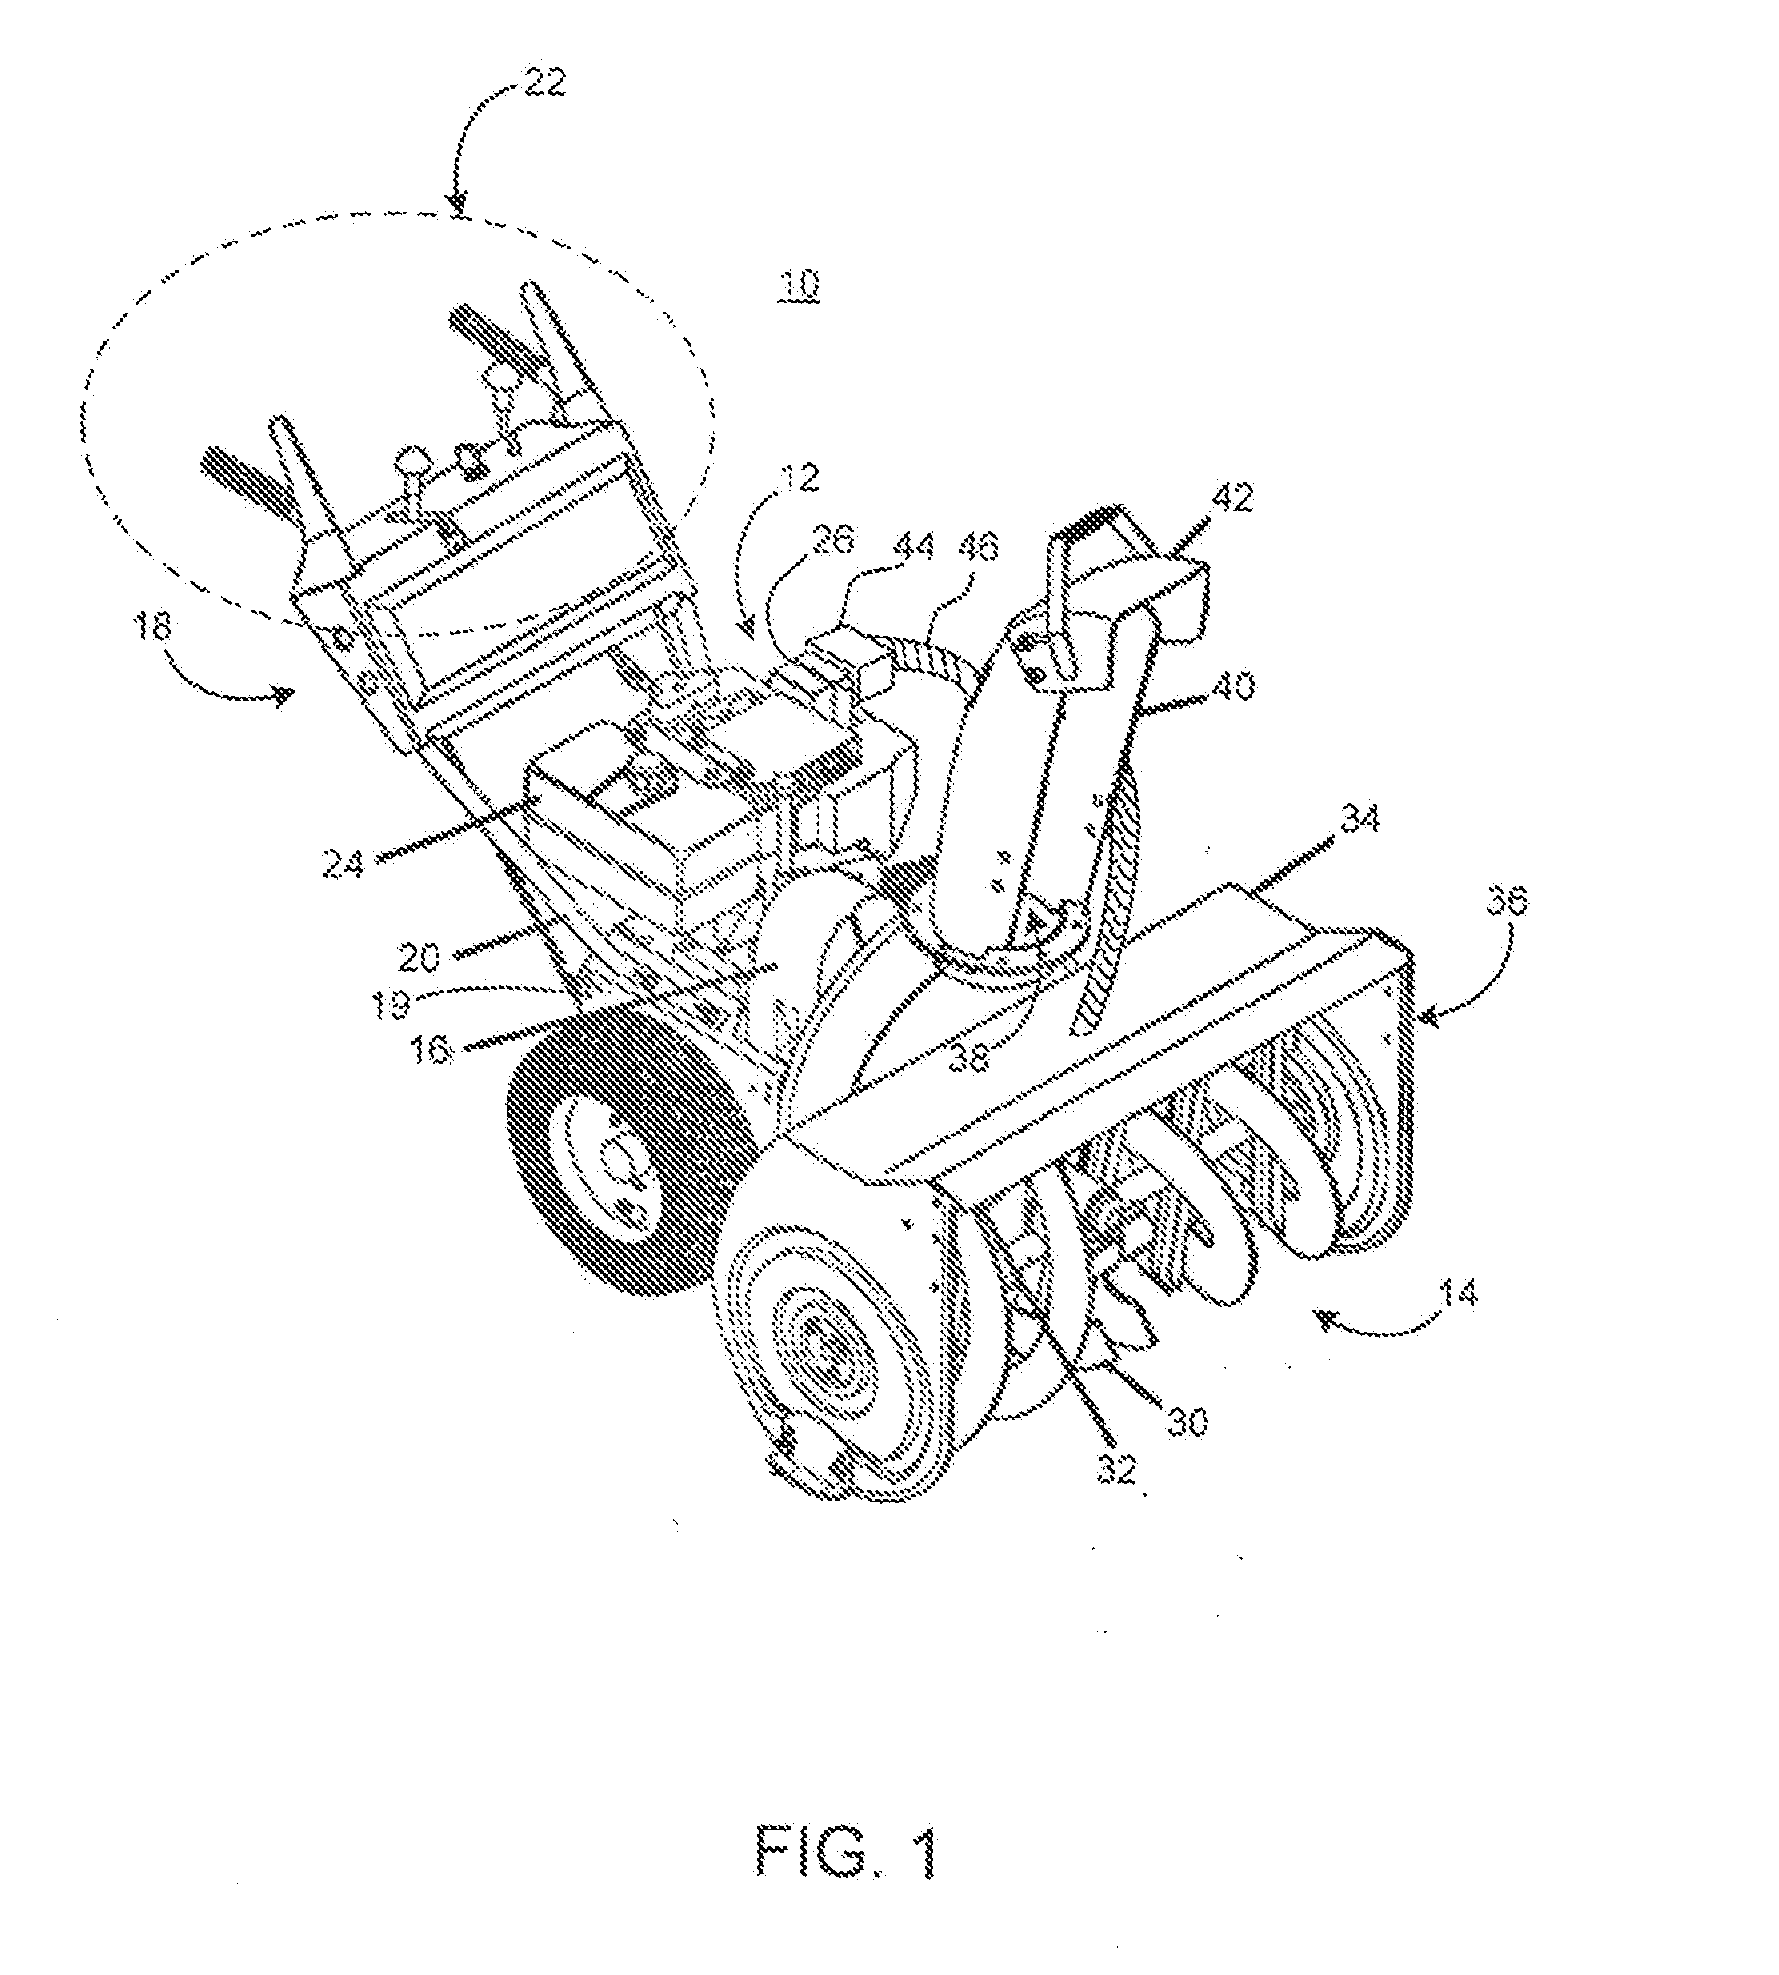 Apparatus and method for mitigating freezing of a snow handling mechanism in a snow blower